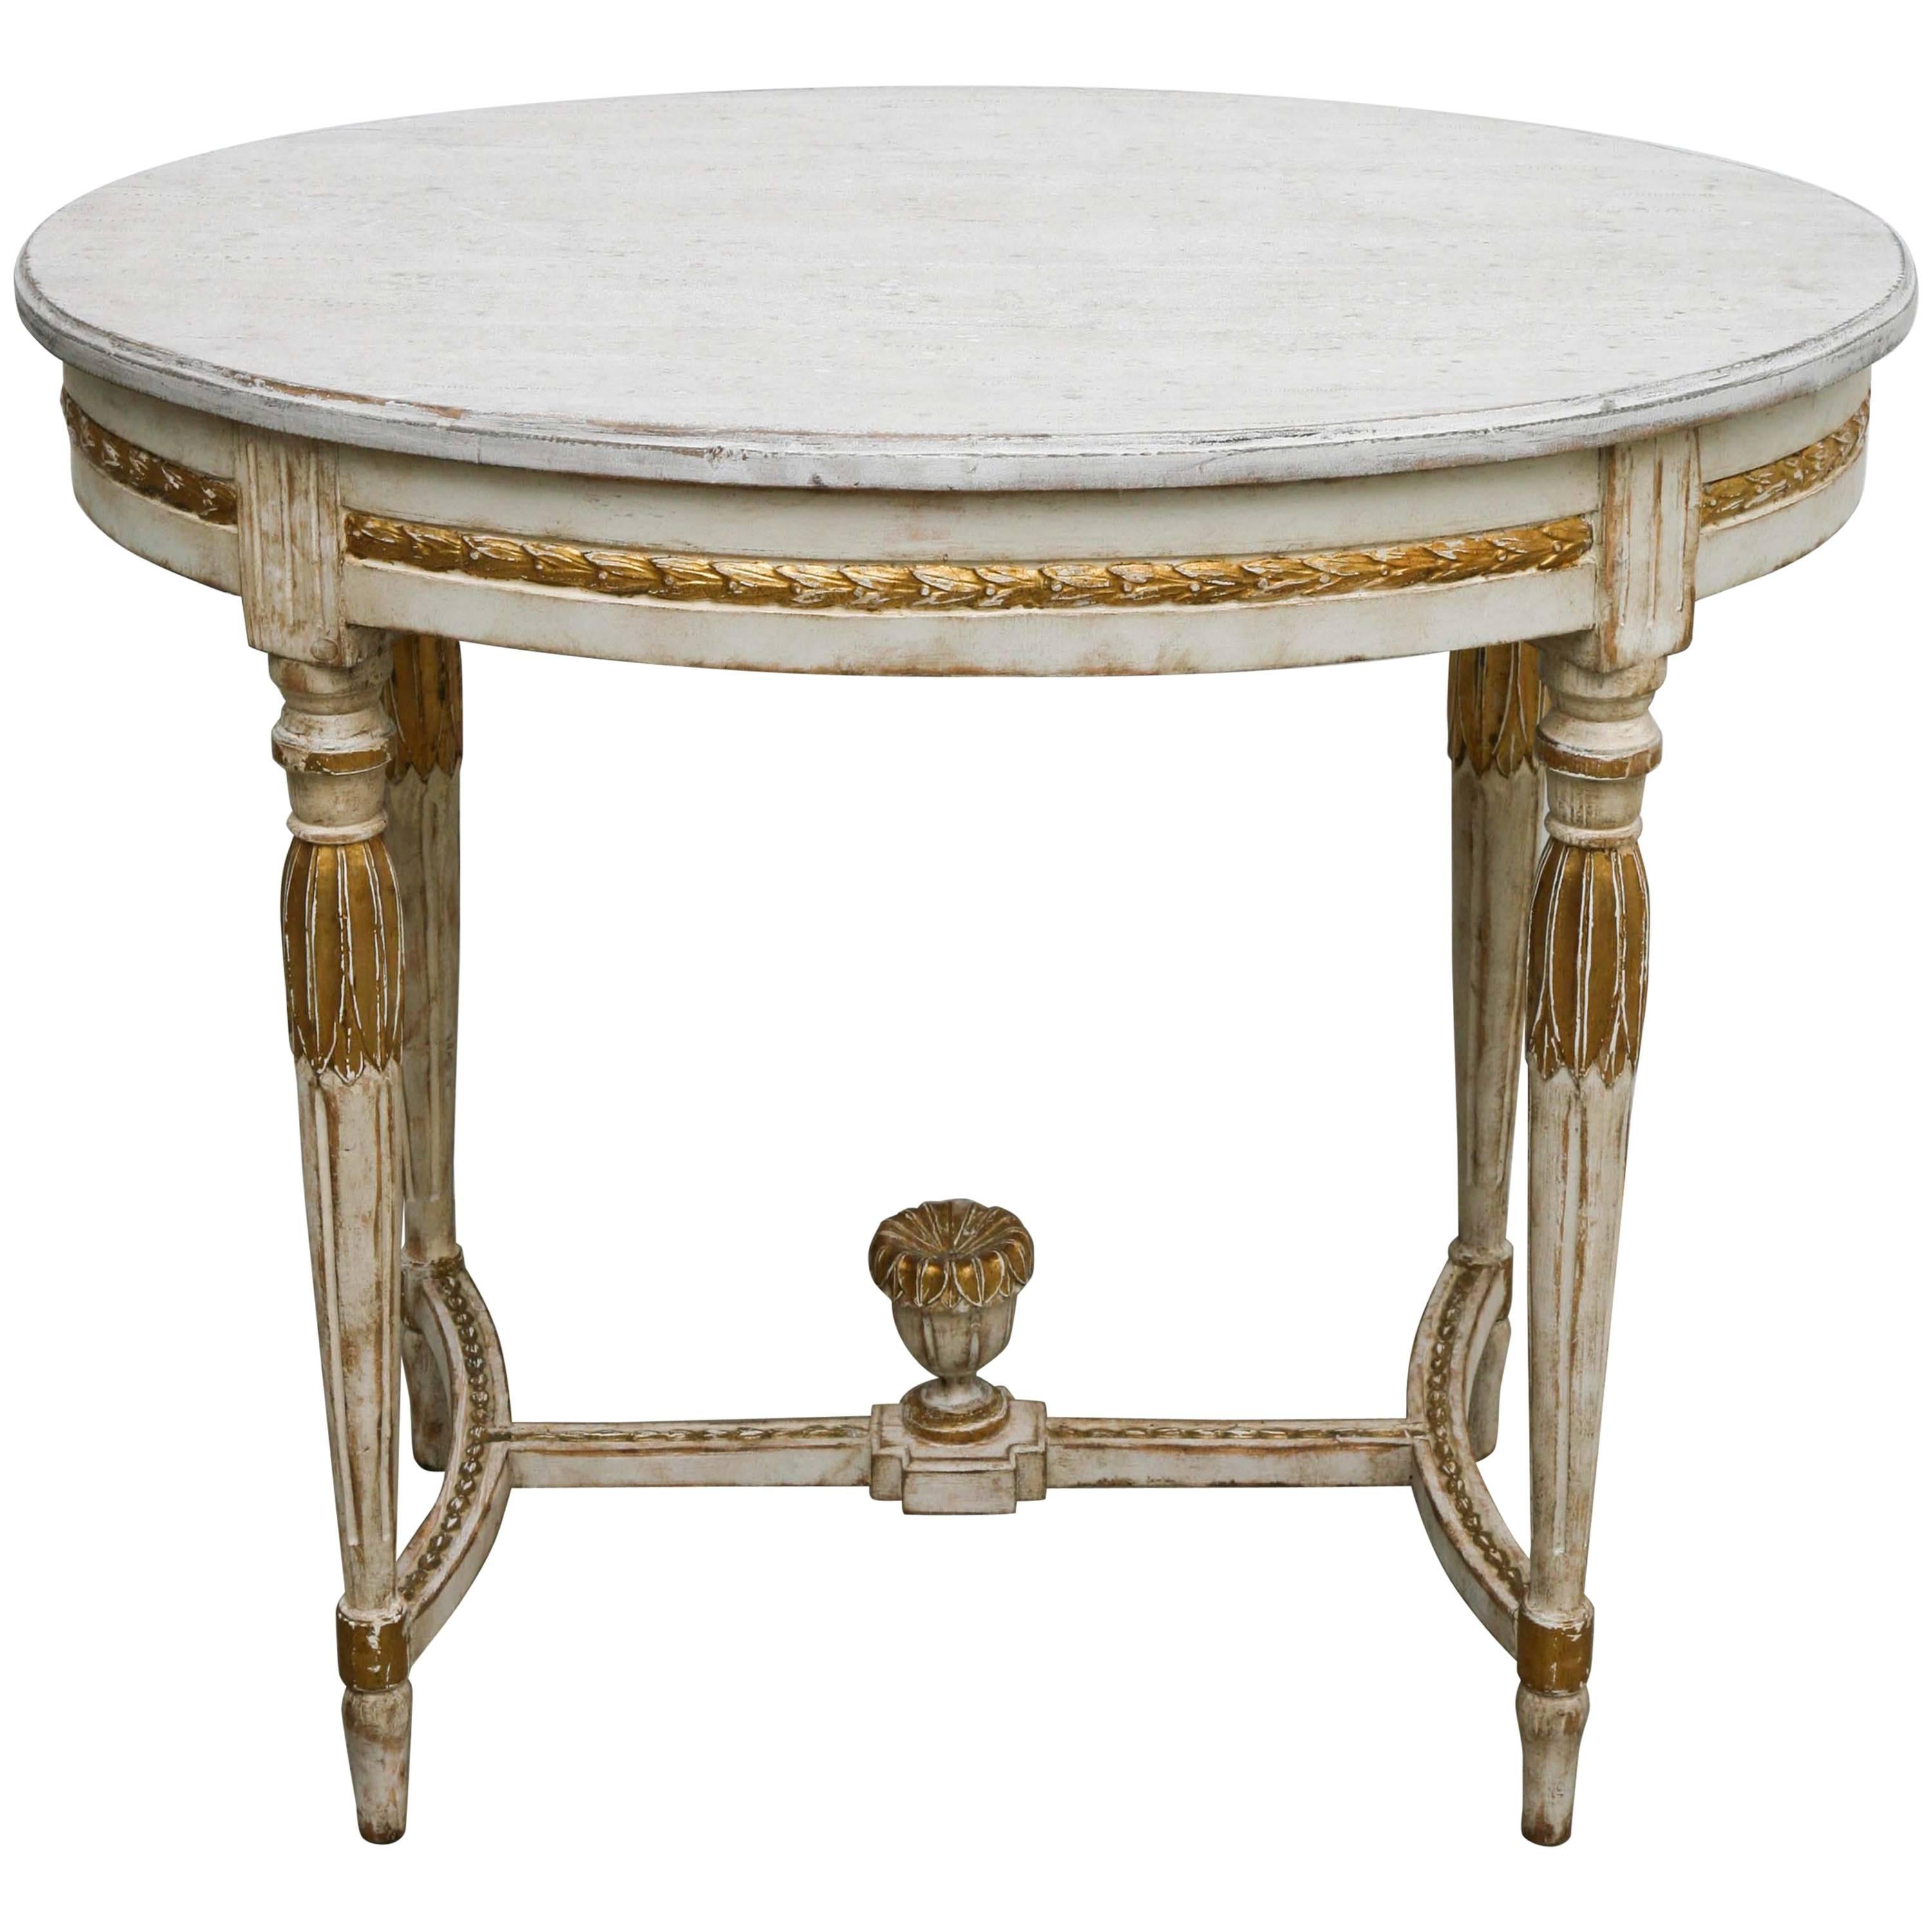 Antique Swedish Period Oval Table, Painted and Gilt Finish, 19th Century